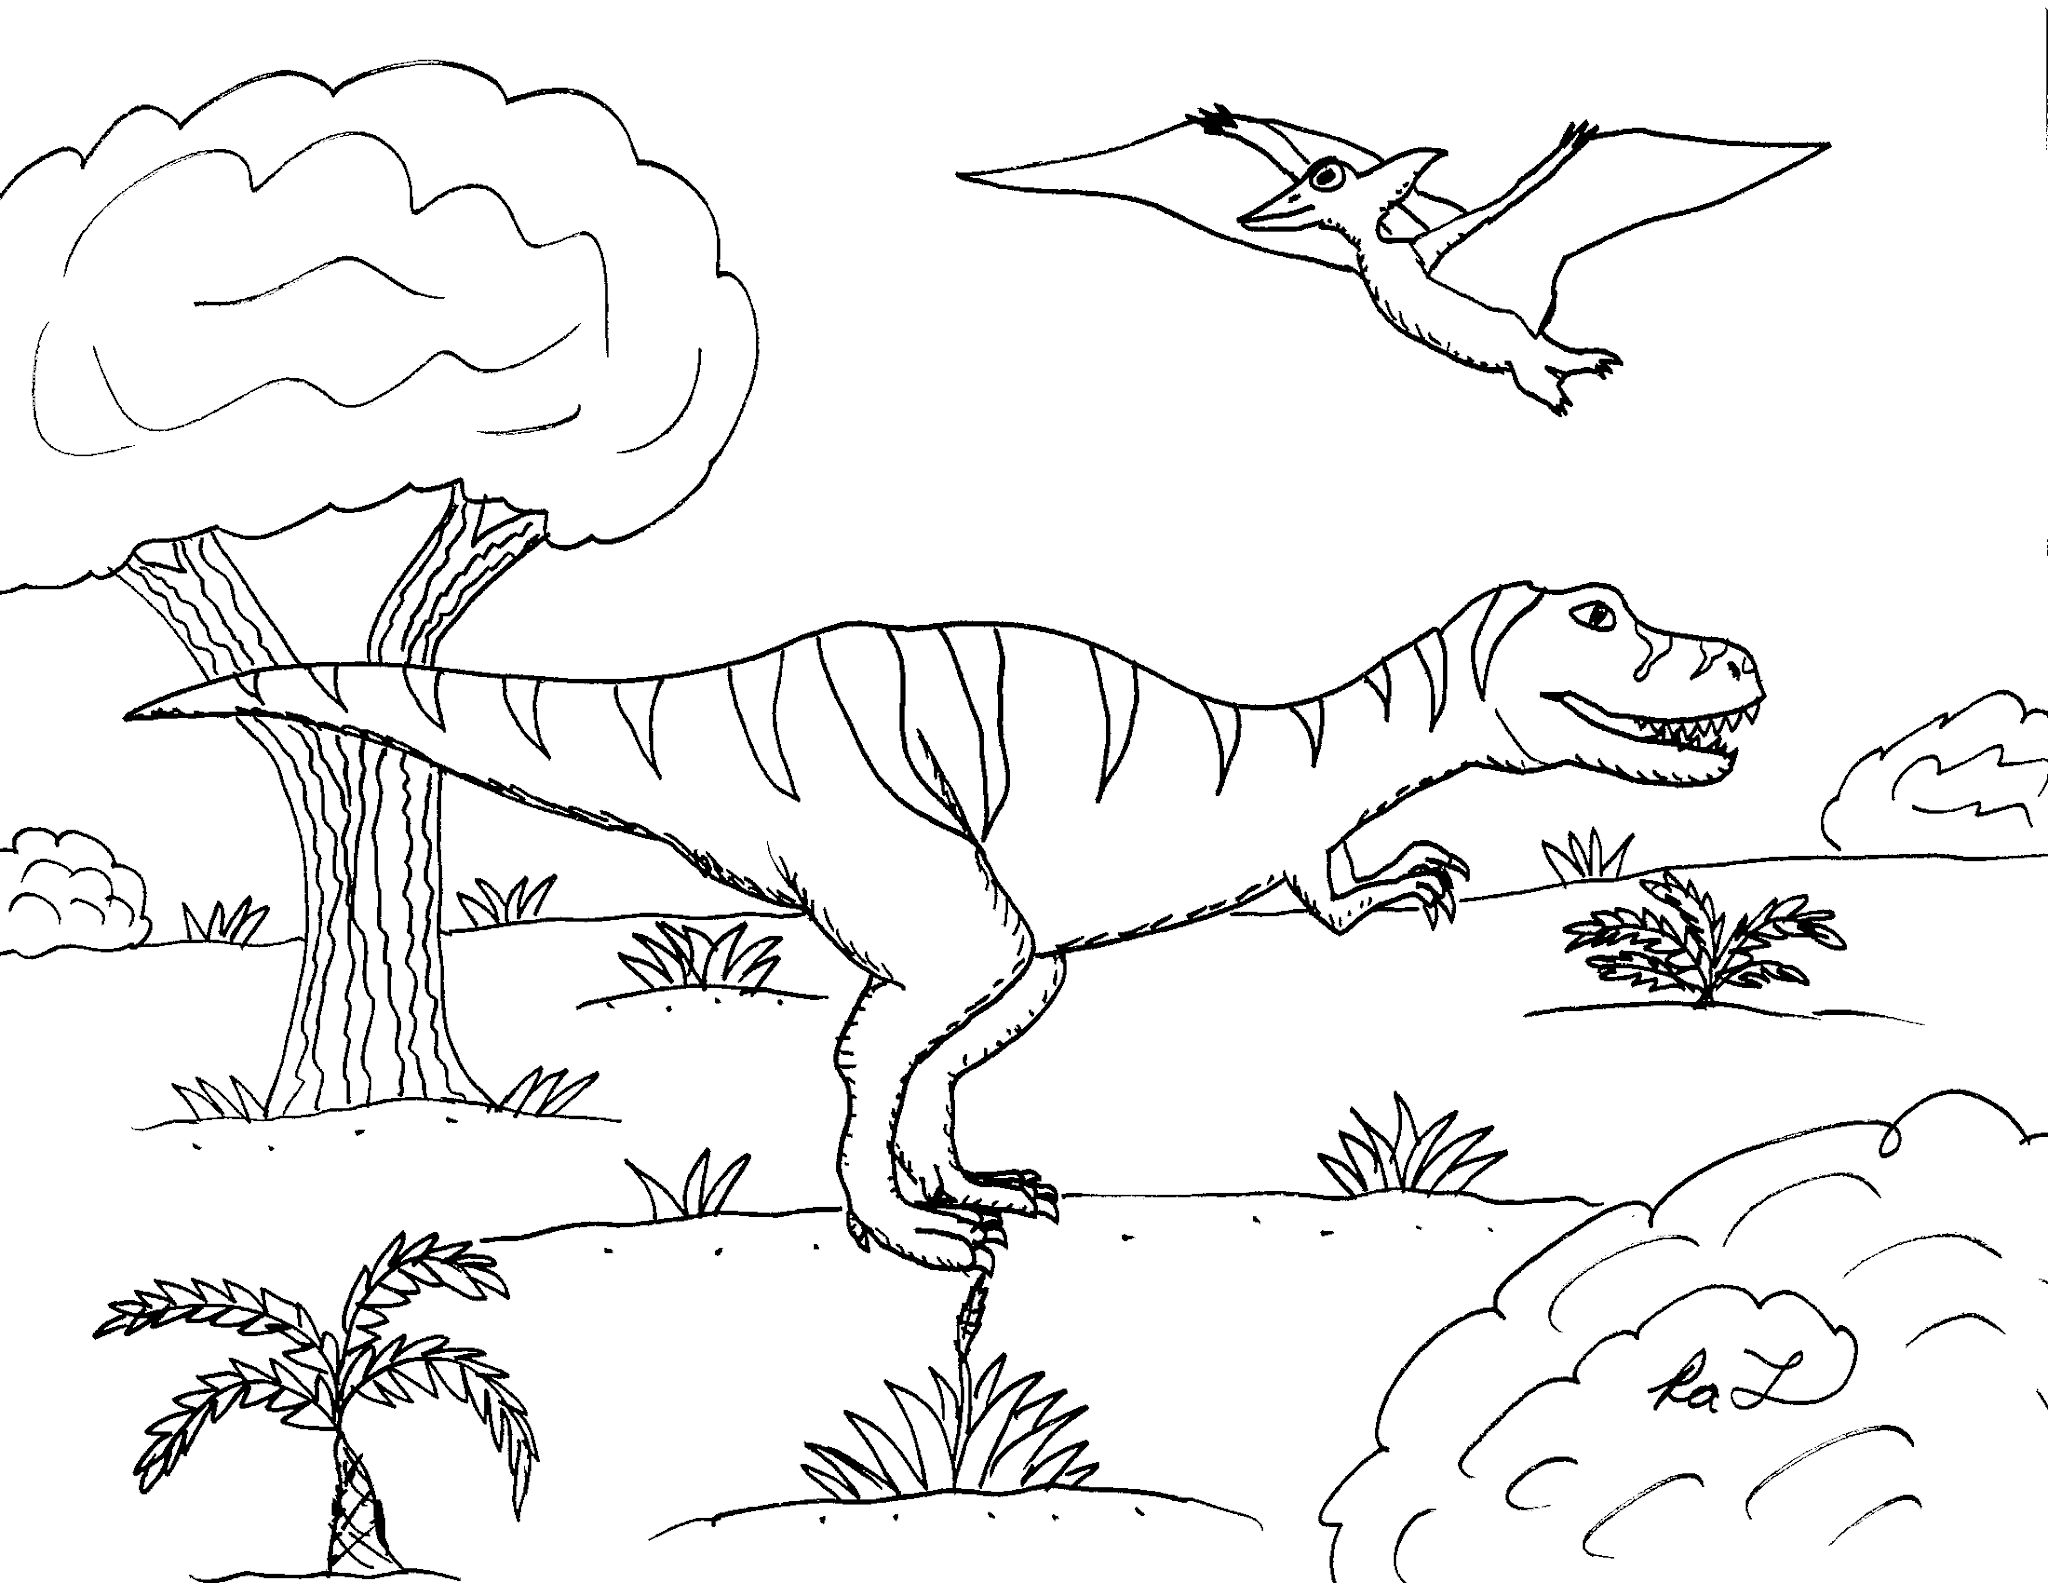 Robin's Great Coloring Pages: T. rex and Pteranodon coloring pages